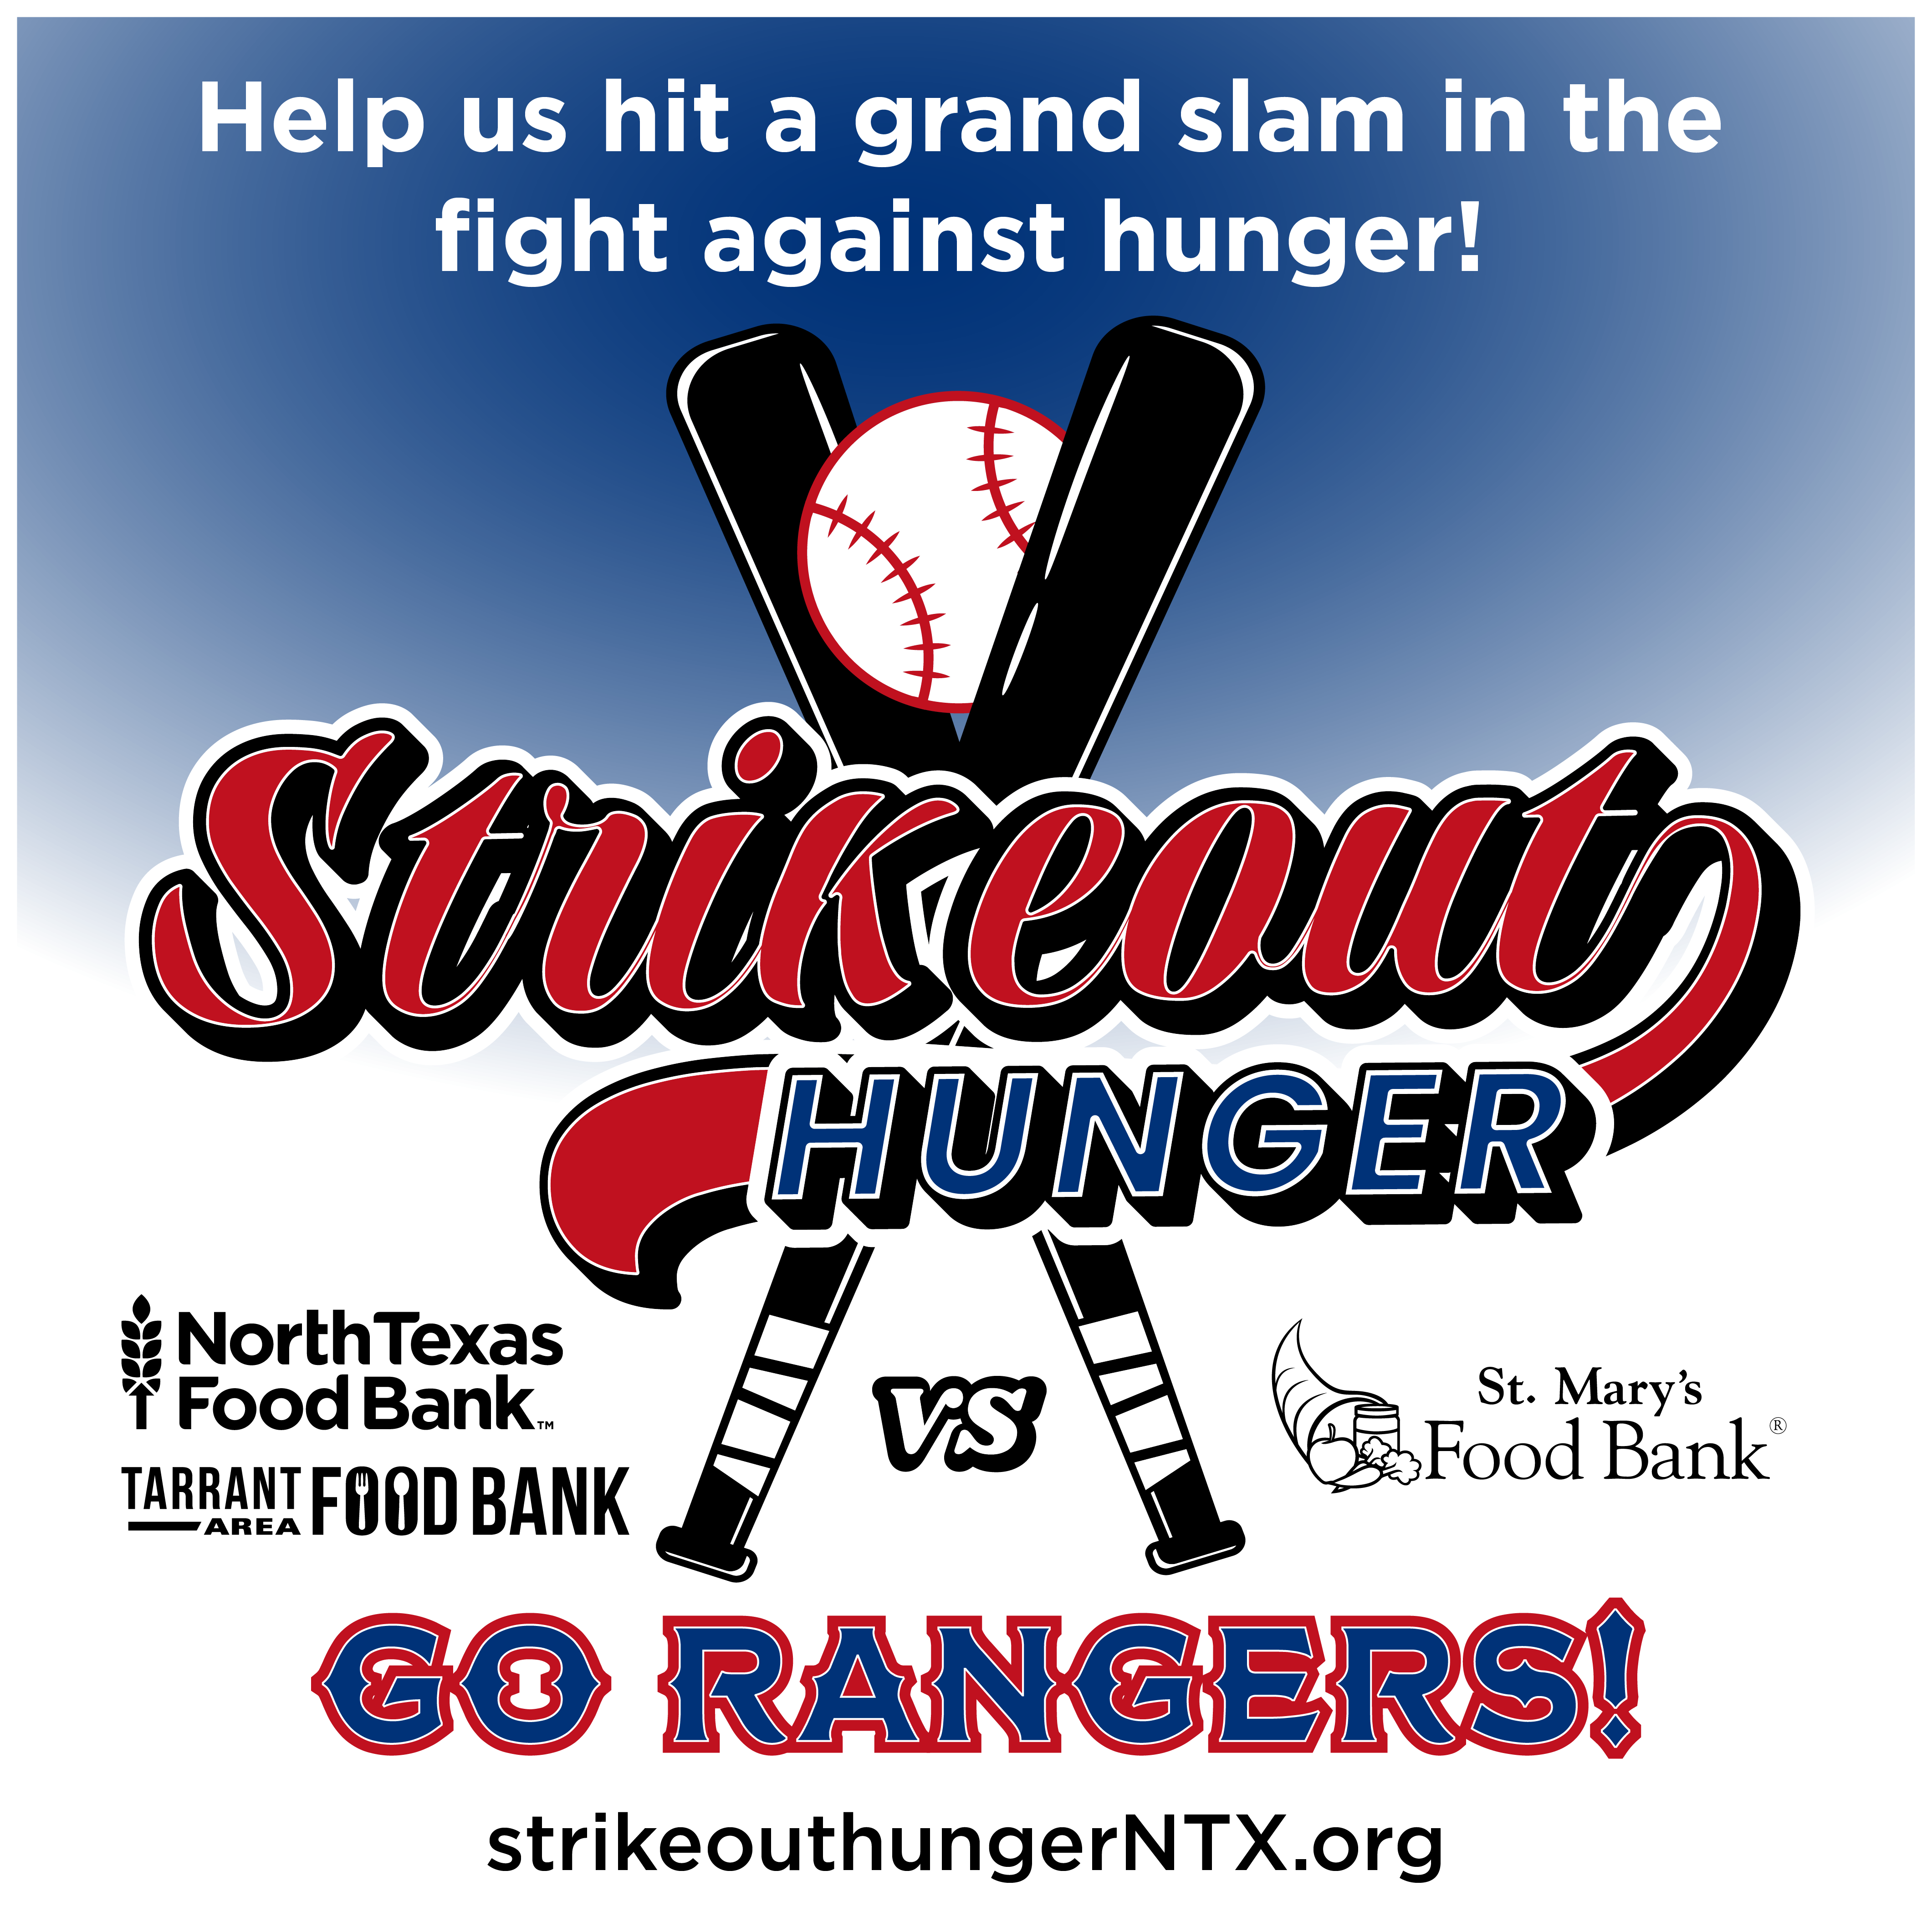 Fight Hunger. Spark Change.” Campaign to Combat Hunger in Arizona - St.  Mary's Food Bank